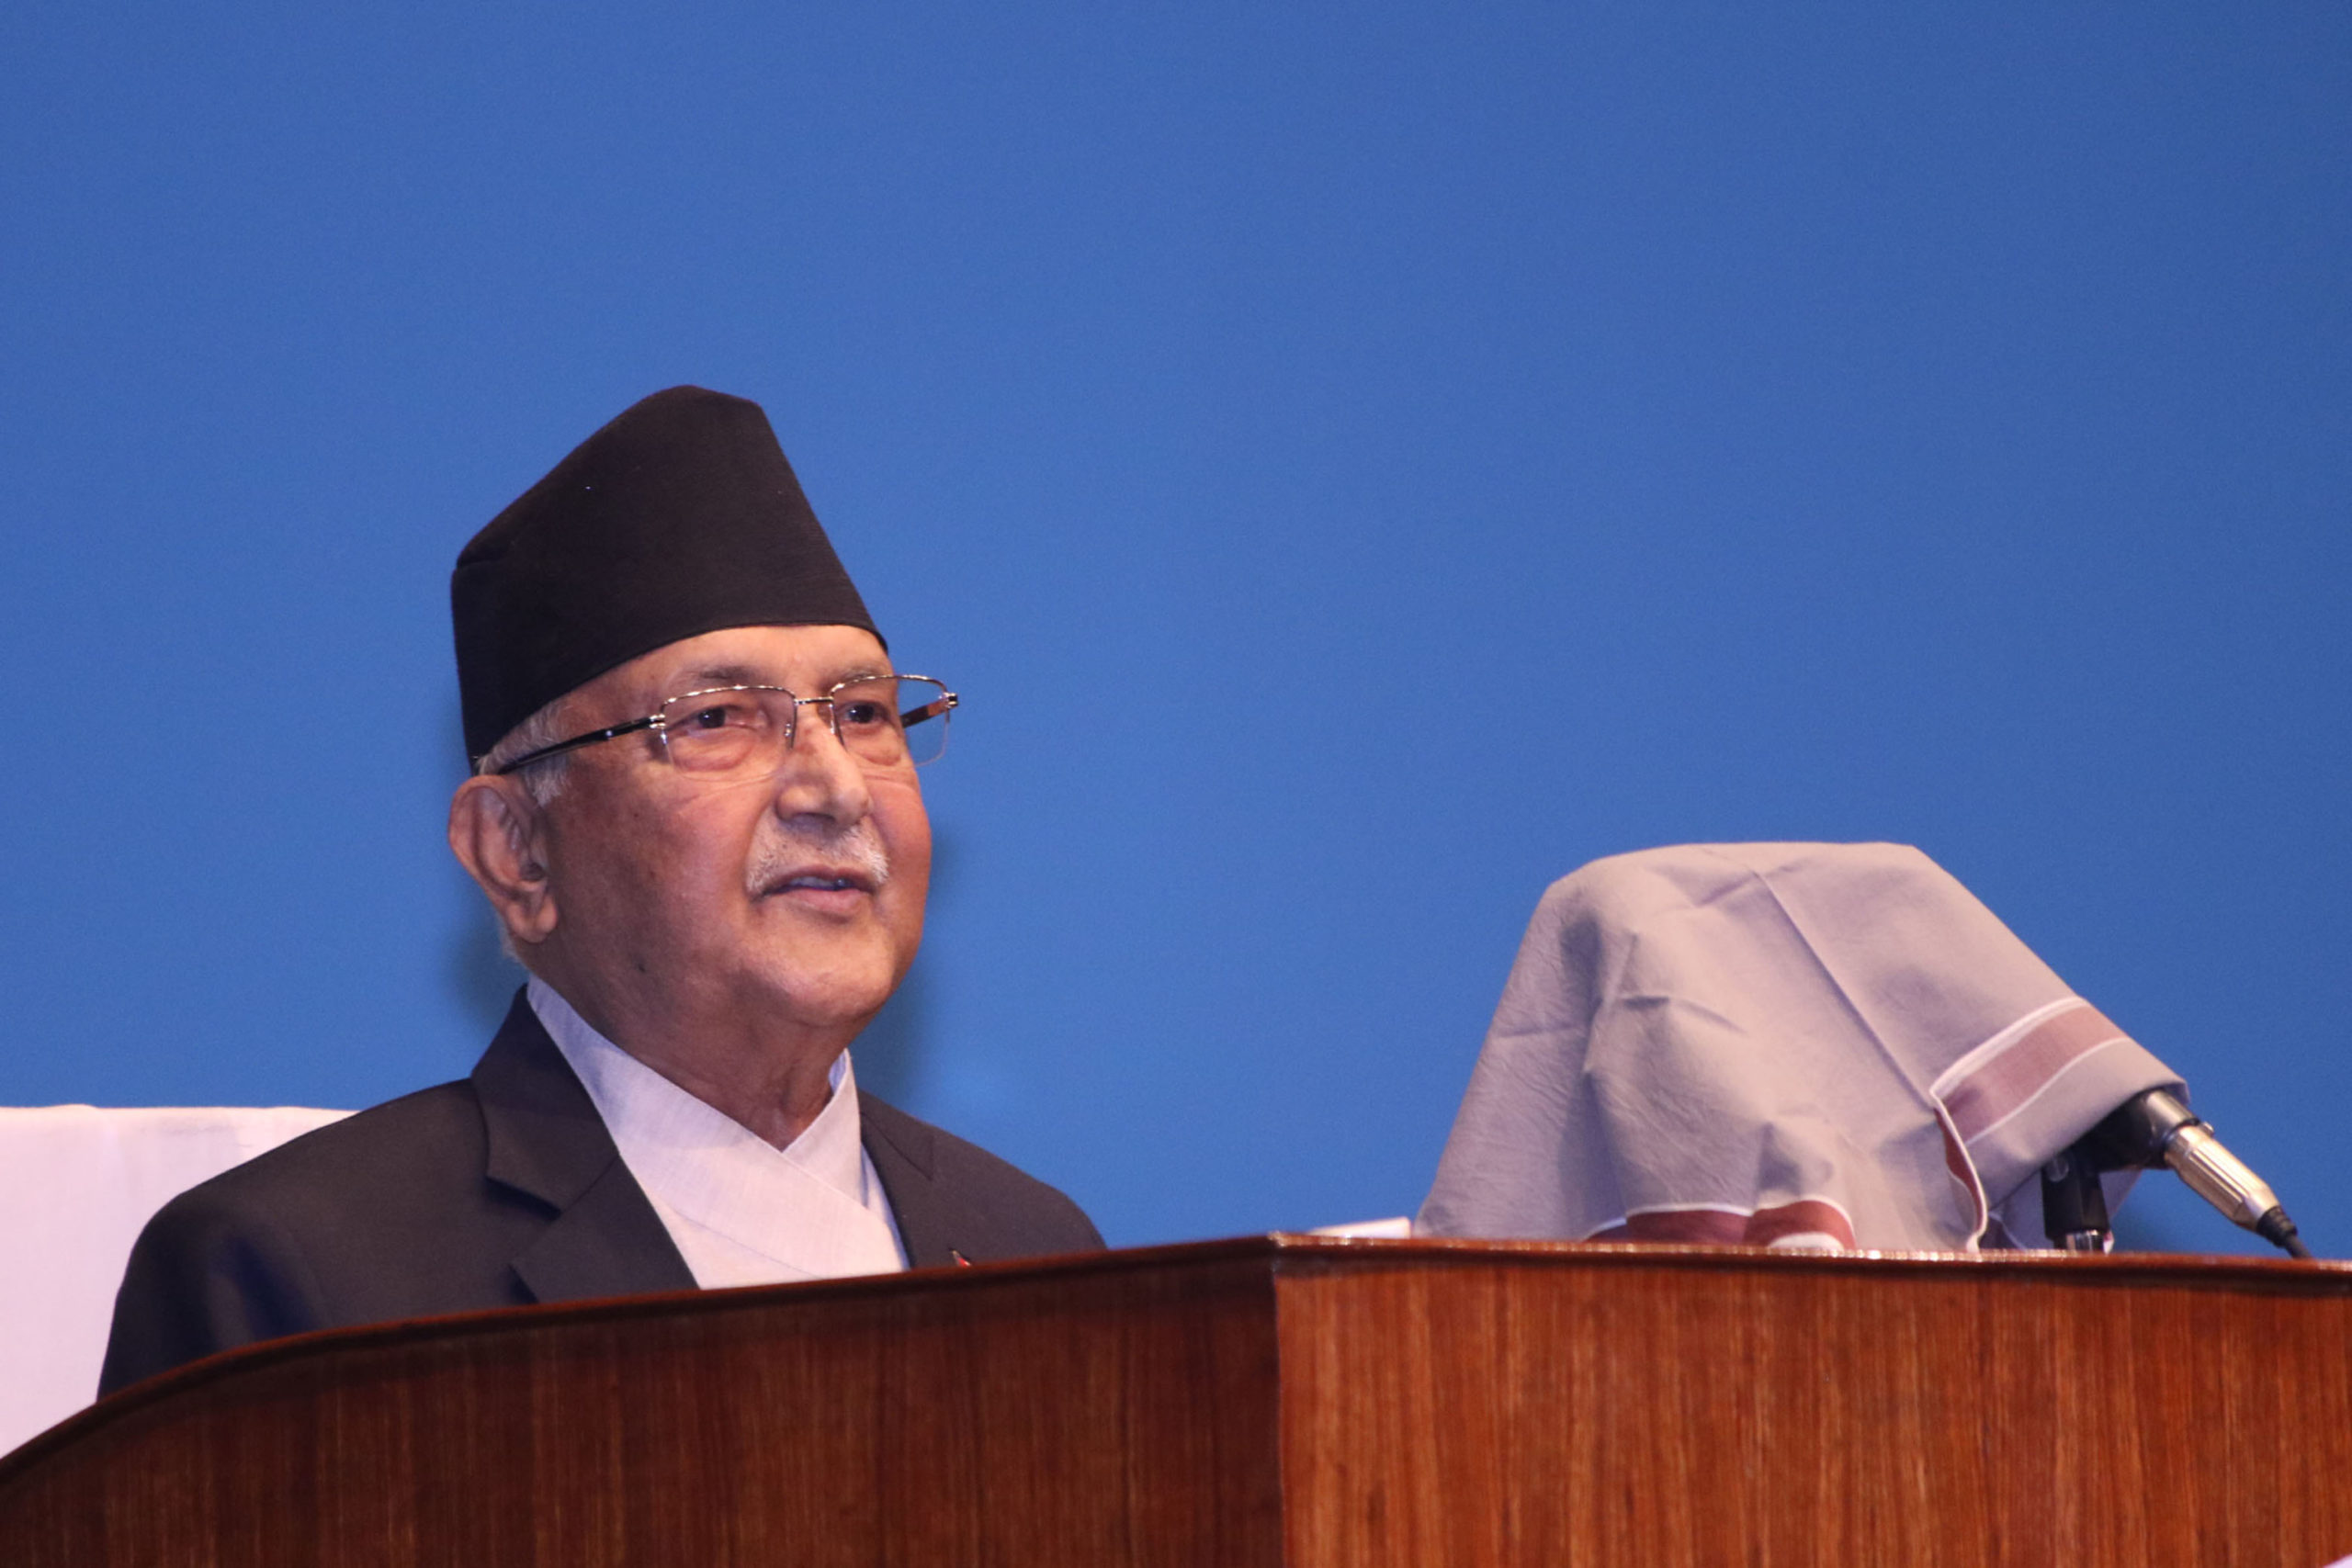 All 15 did not die of COVID-19, claims PM Oli